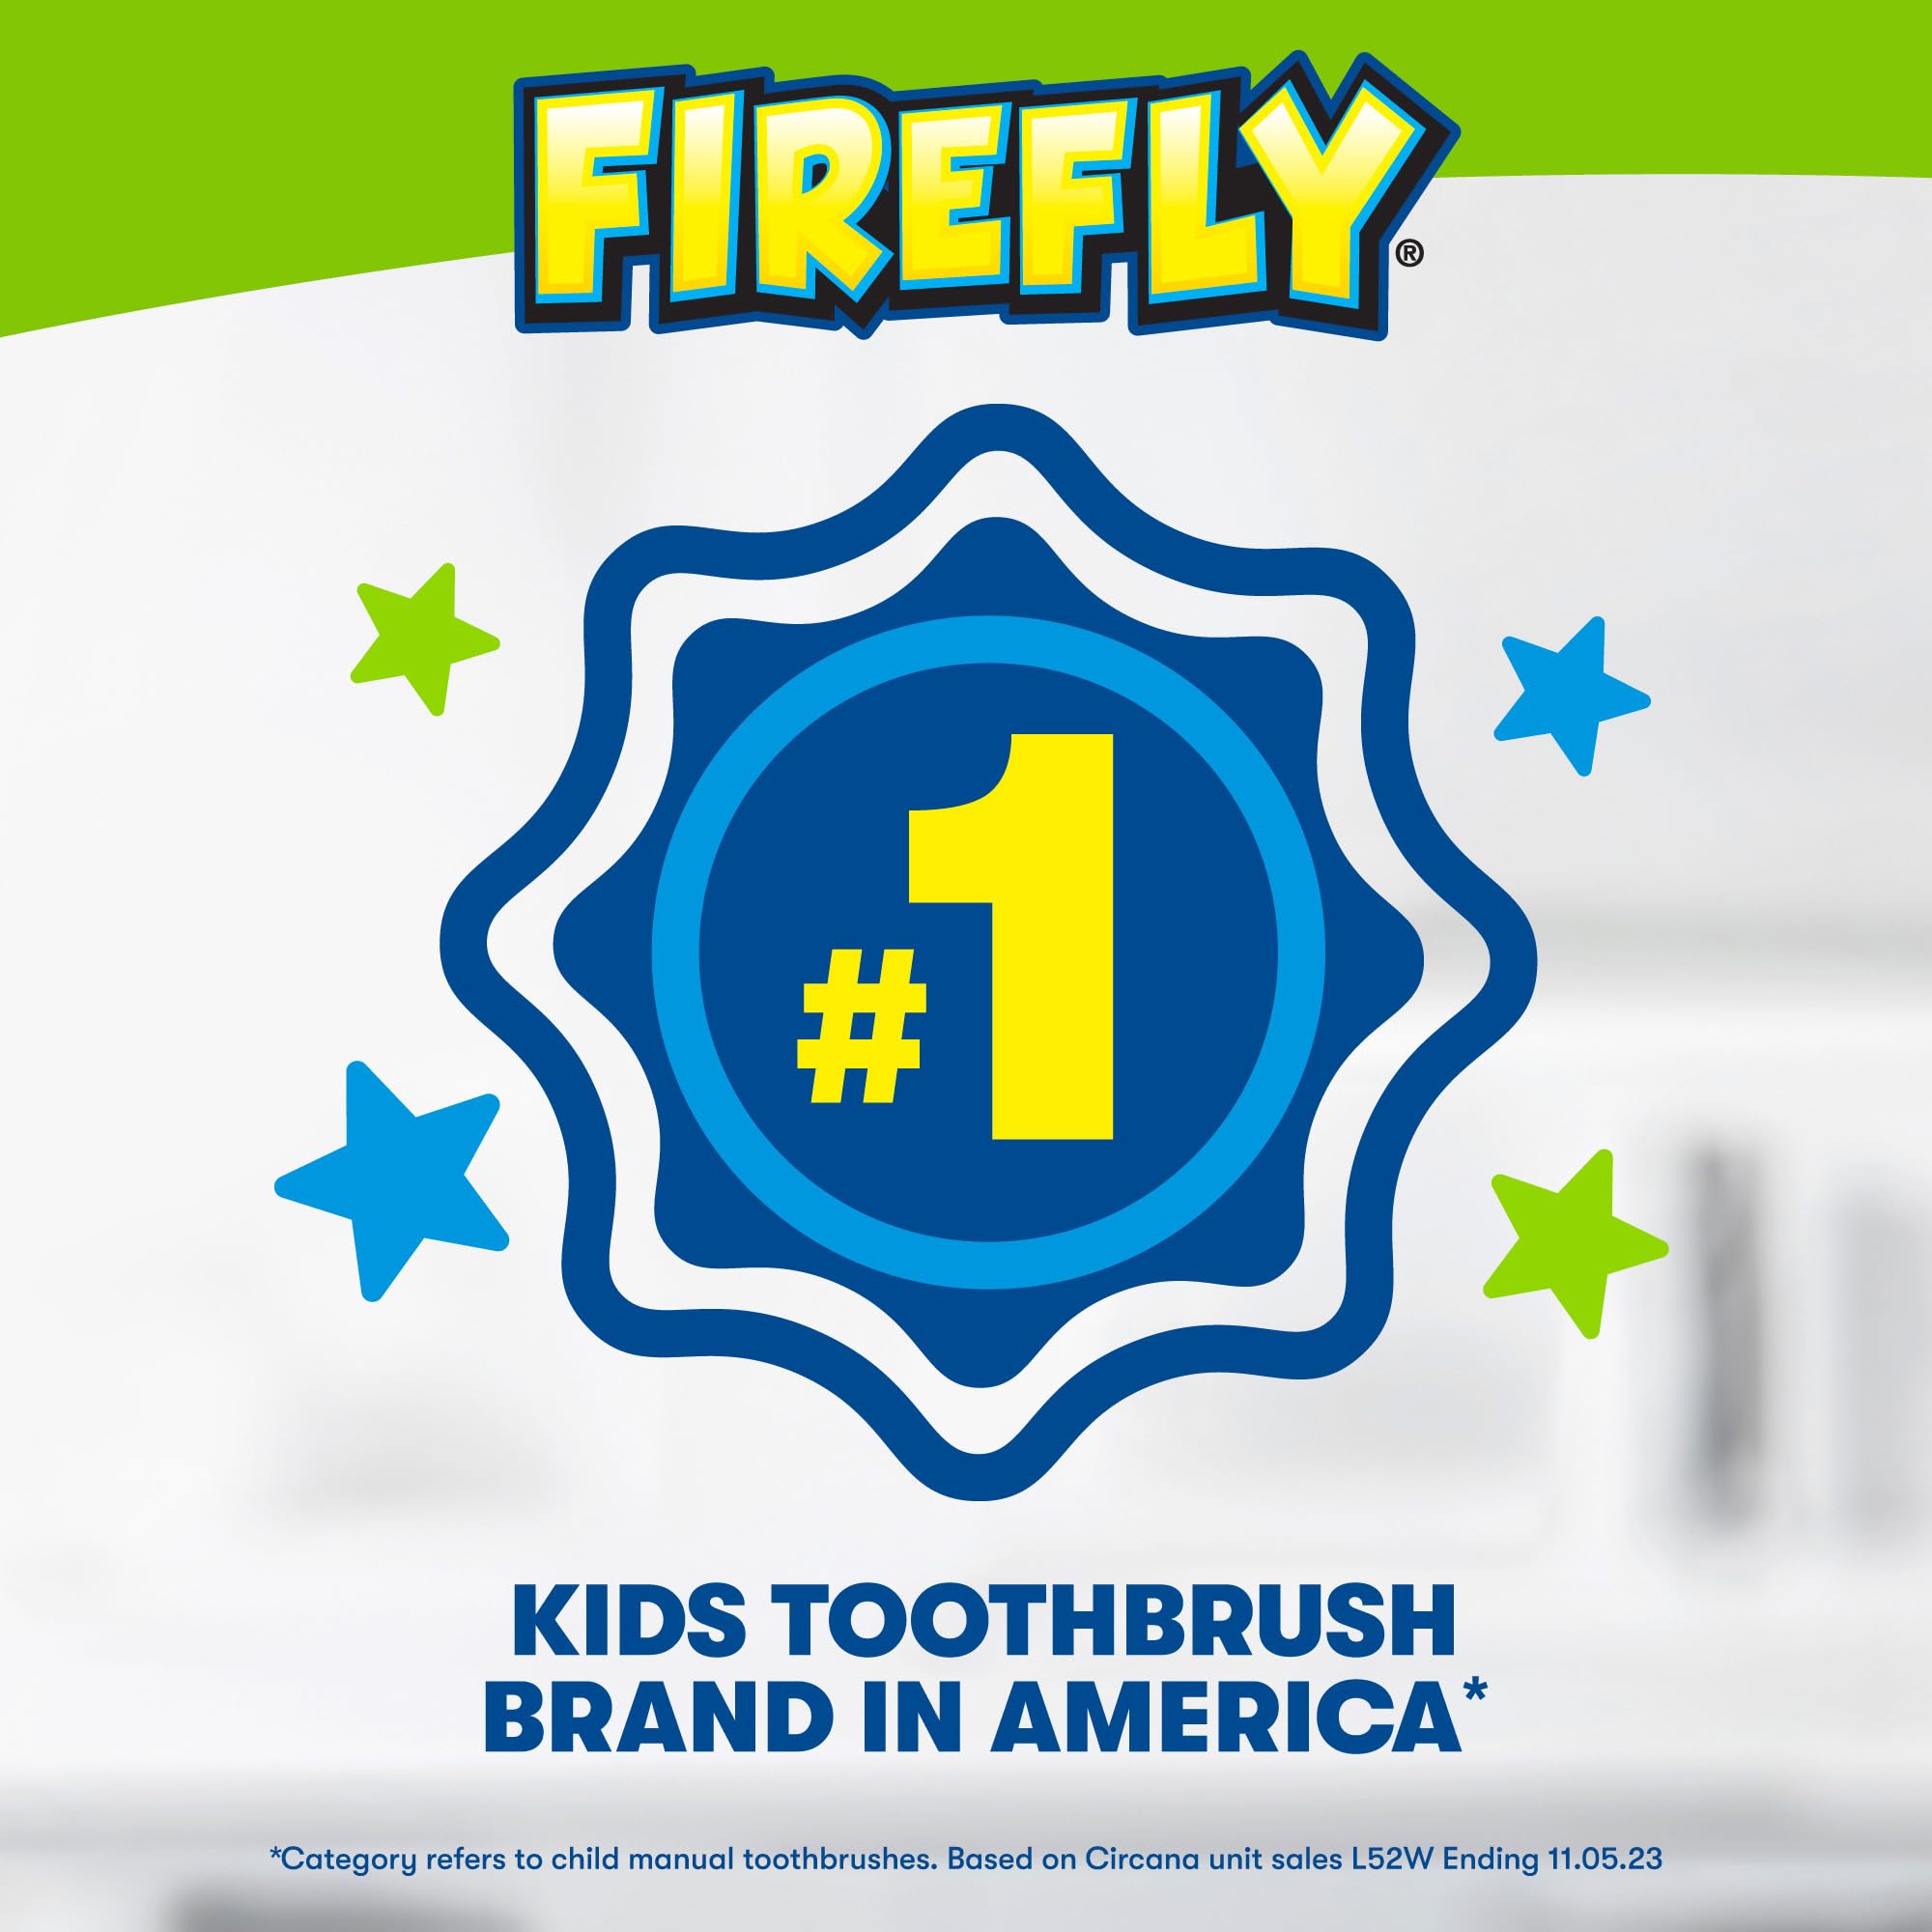 Firefly Clean N' Protect Teenage Mutant Ninja Turtles Power Toothbrush with 3D Character Cover, Soft Bristles, Battery Included, Ages 3+, 1+1